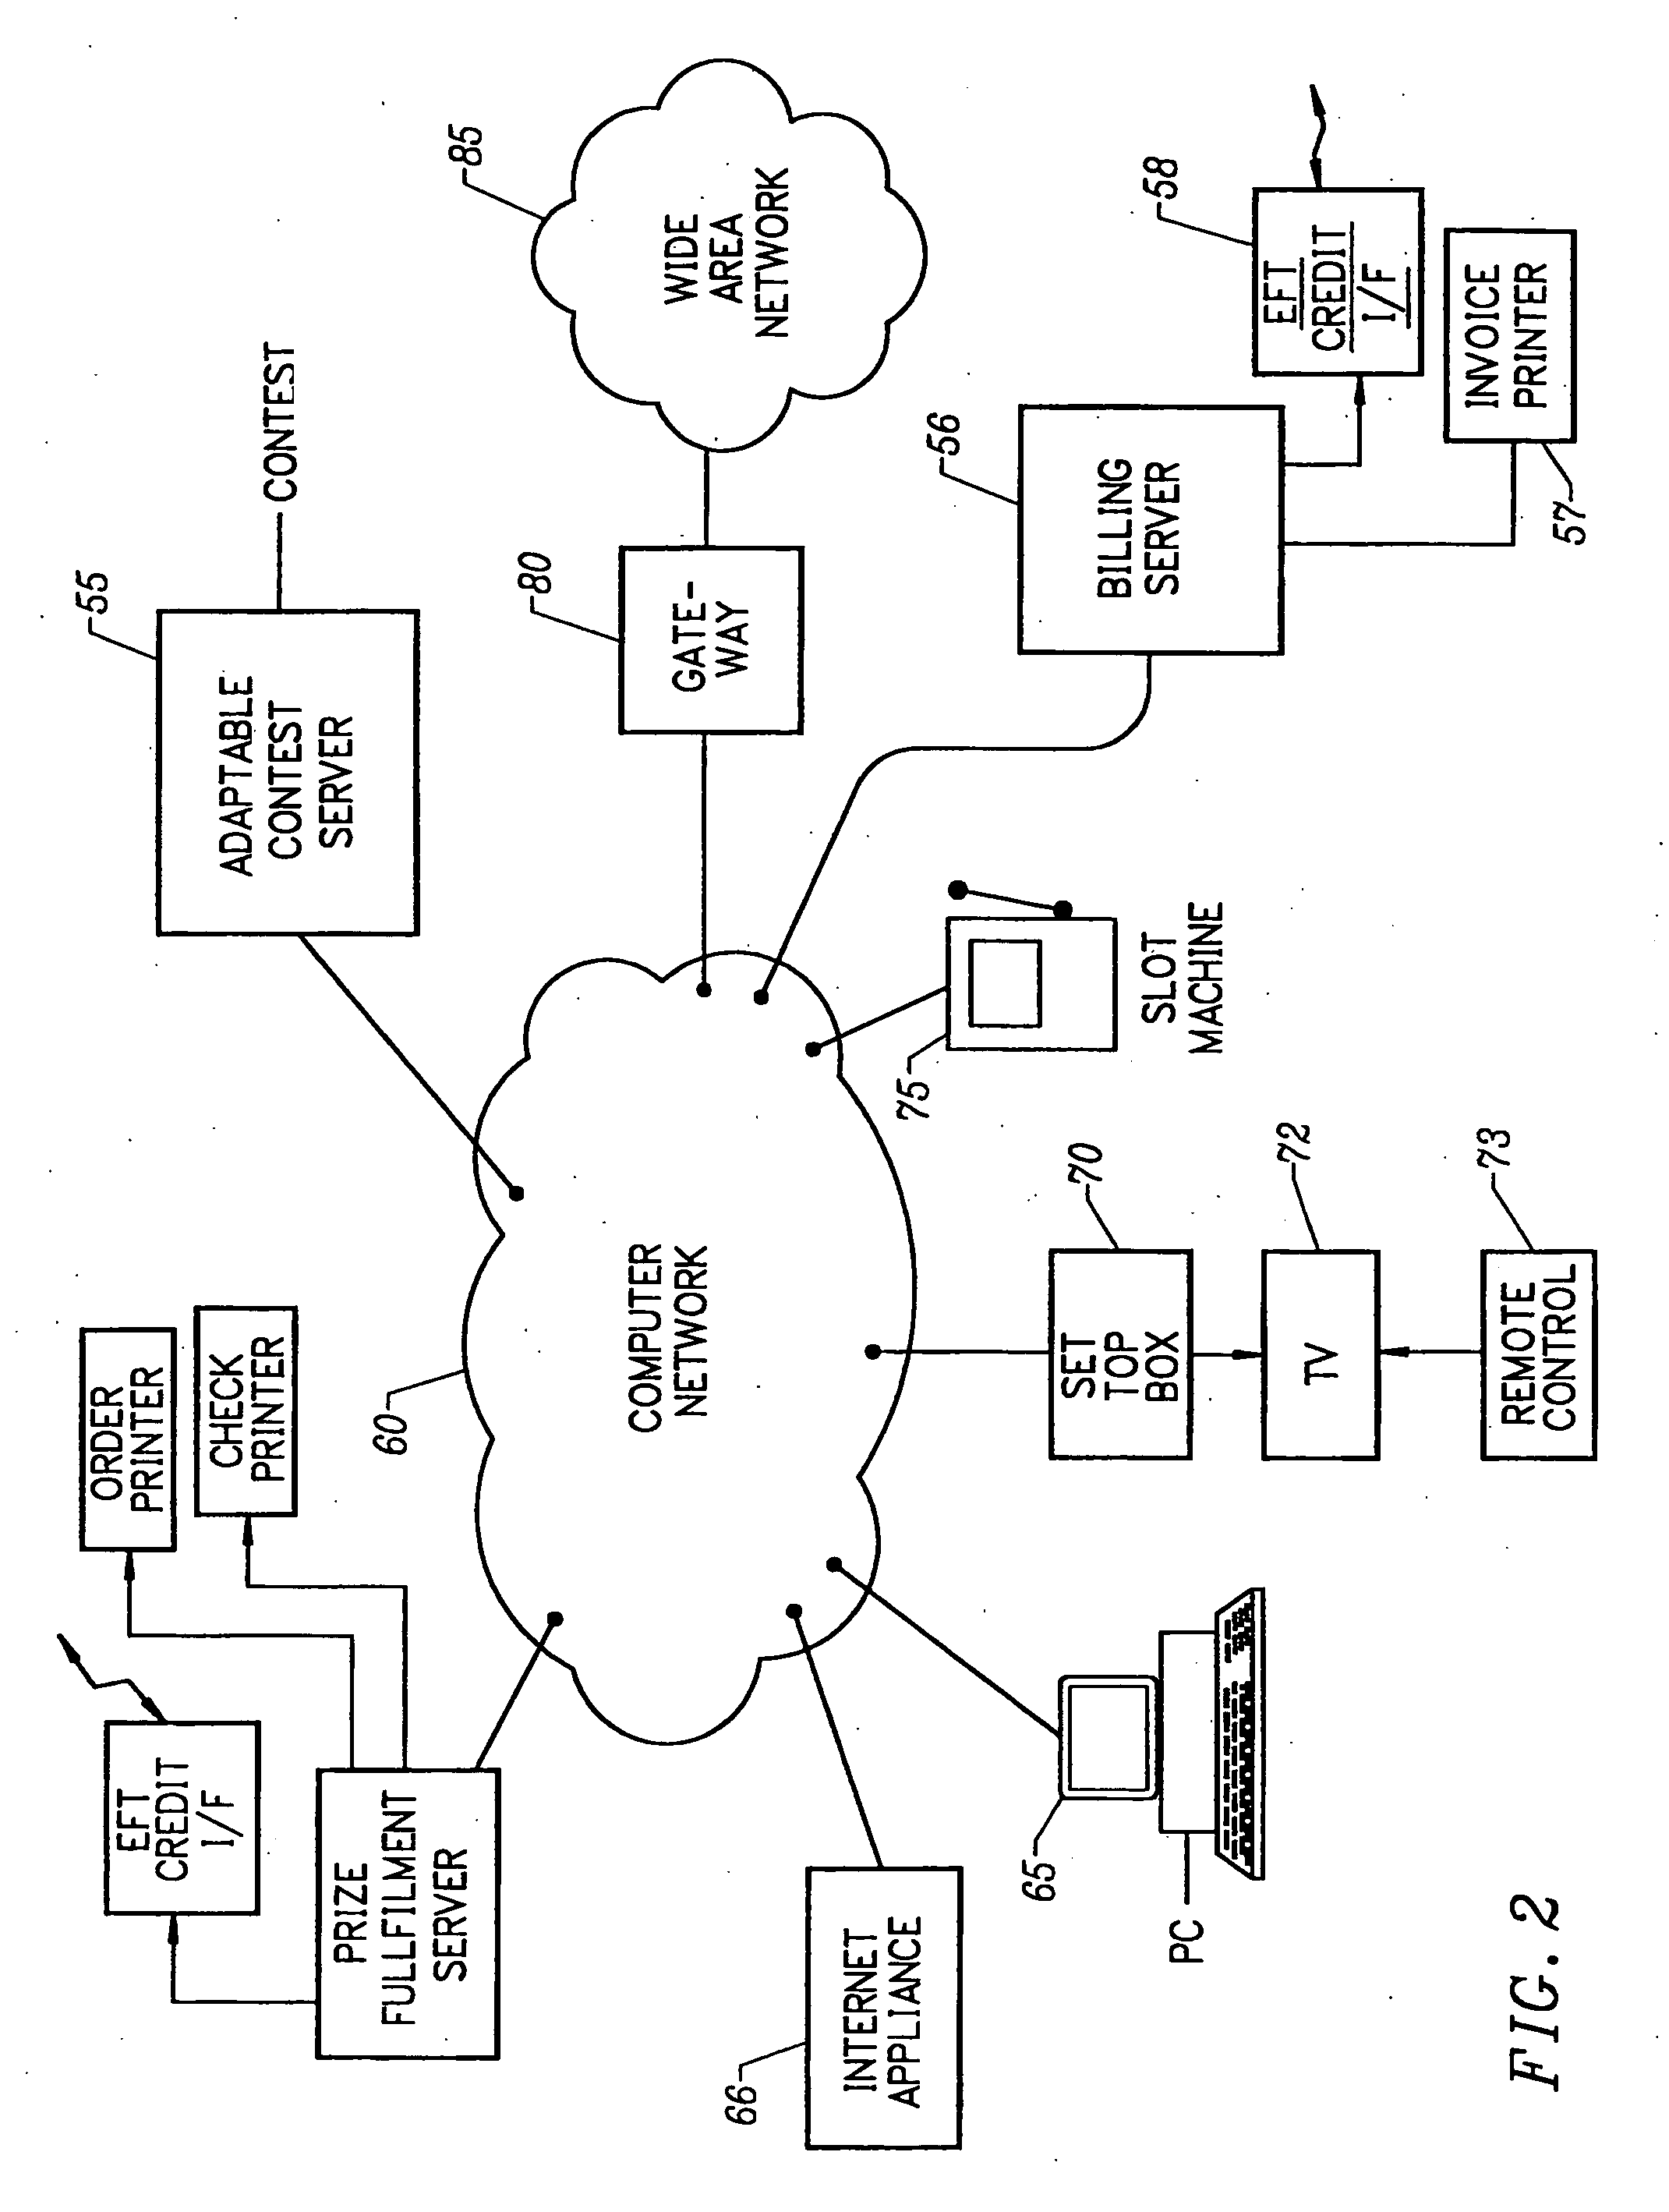 System and method for providing a game of chance via a client device